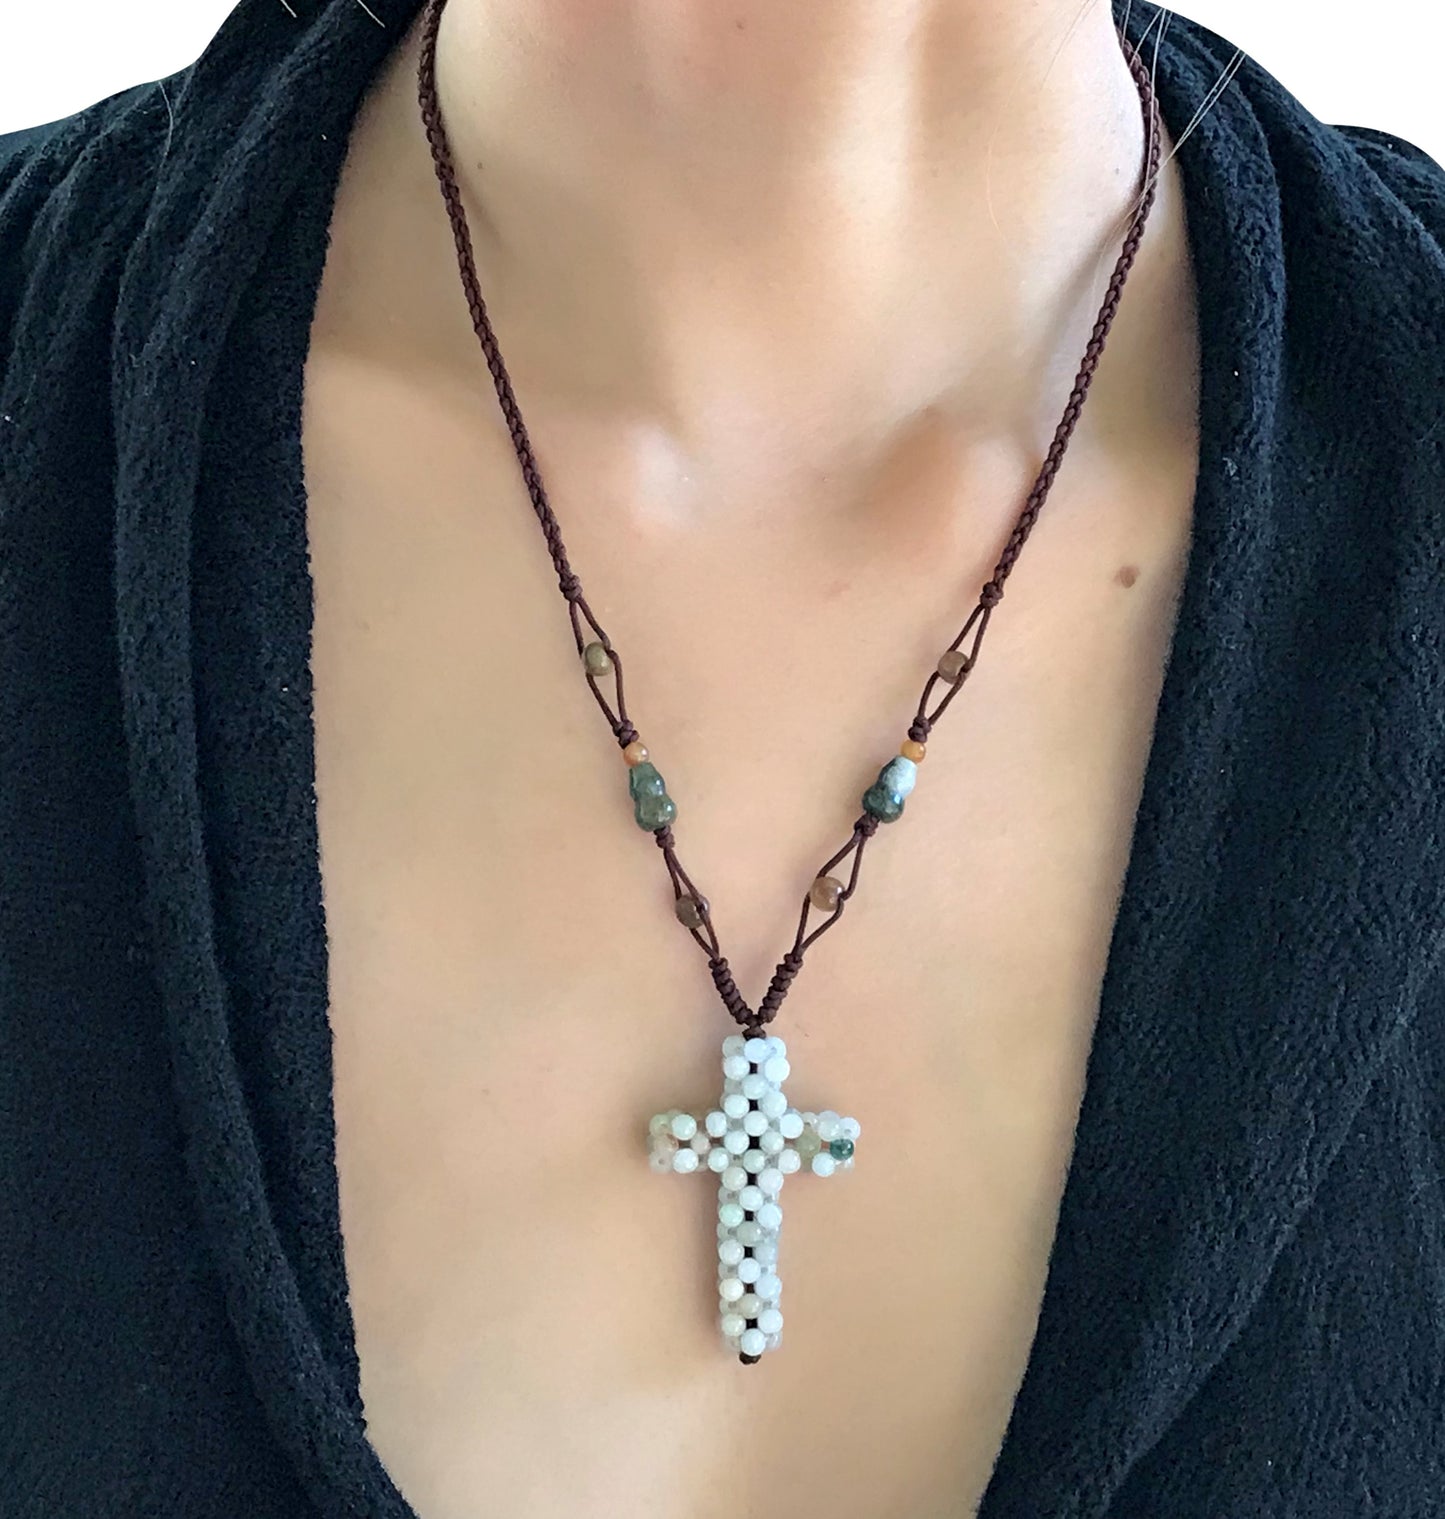 Add Meaning to Your Look with a Hundred Jade Beads Cross Necklace